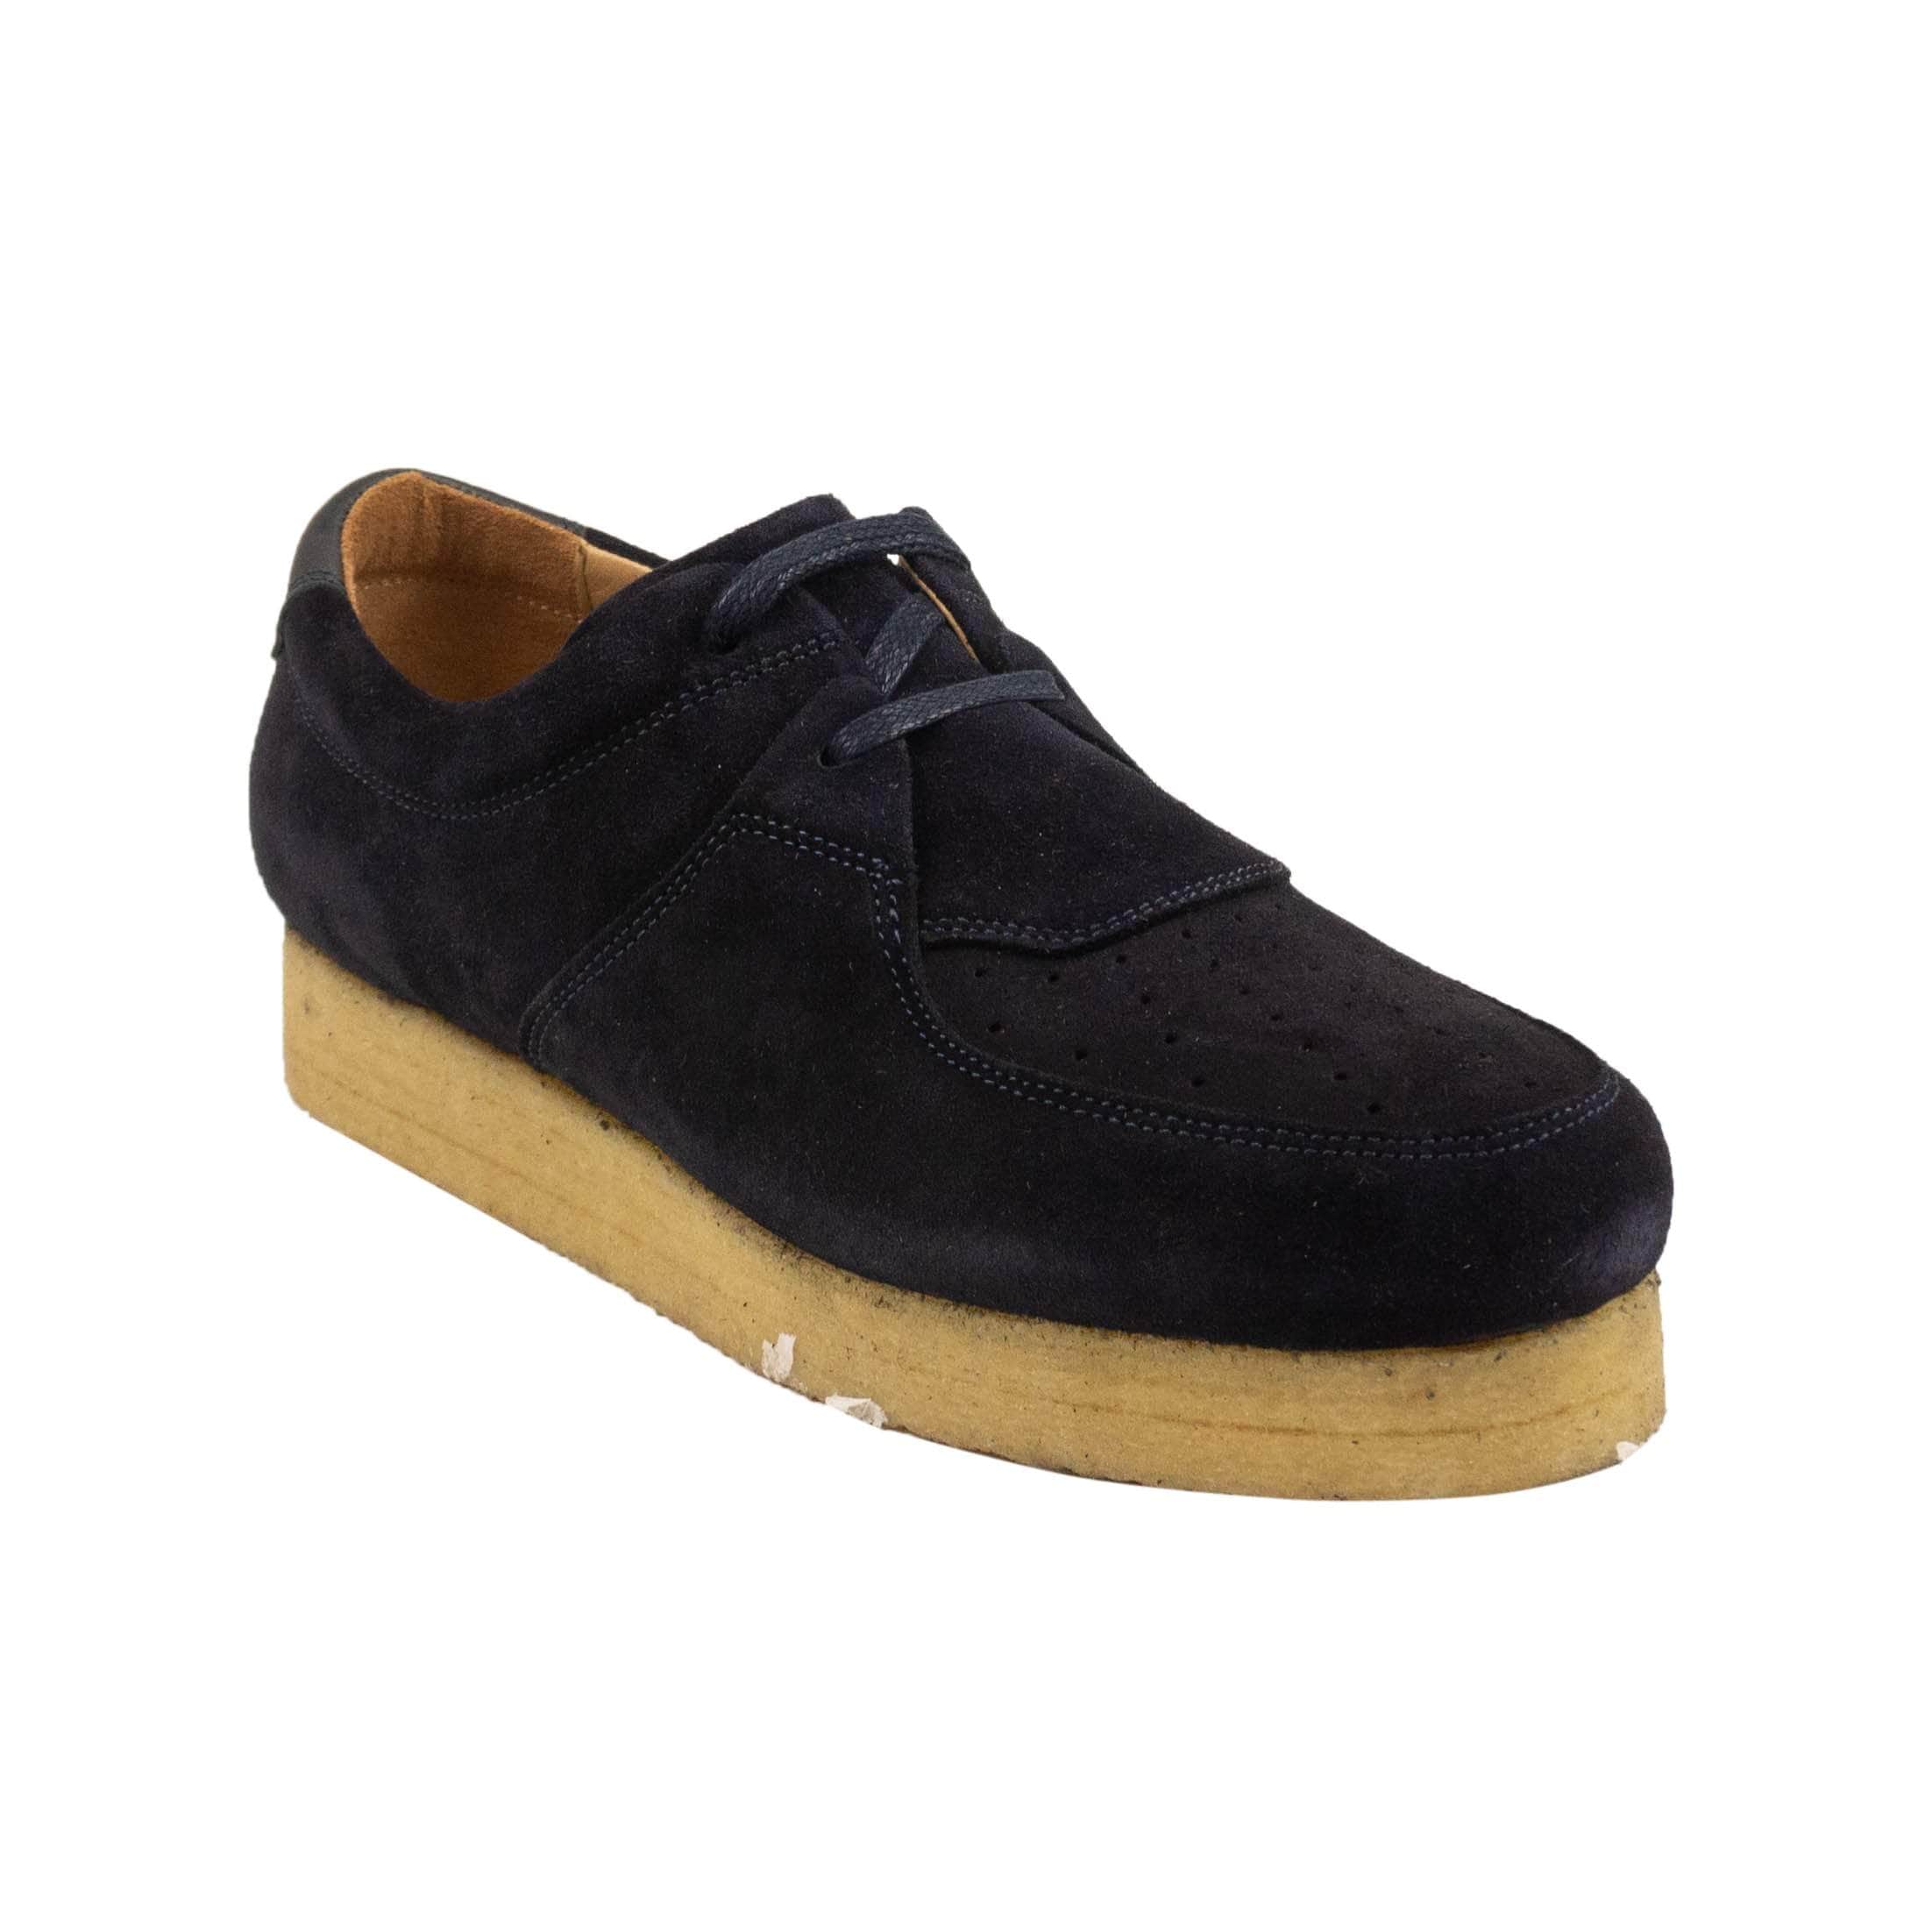 AIME LEON DORE aime-leon-dore, channelenable-all, chicmi, couponcollection, gender-mens, main-shoes, mens-oxfords-derby-shoes, mens-shoes, MixedApparel, size-7, size-8, under-250 7 / 09009_NAVY Black Q27 Suede Wallabe Shoes 95-ALD-2001/7 95-ALD-2001/7